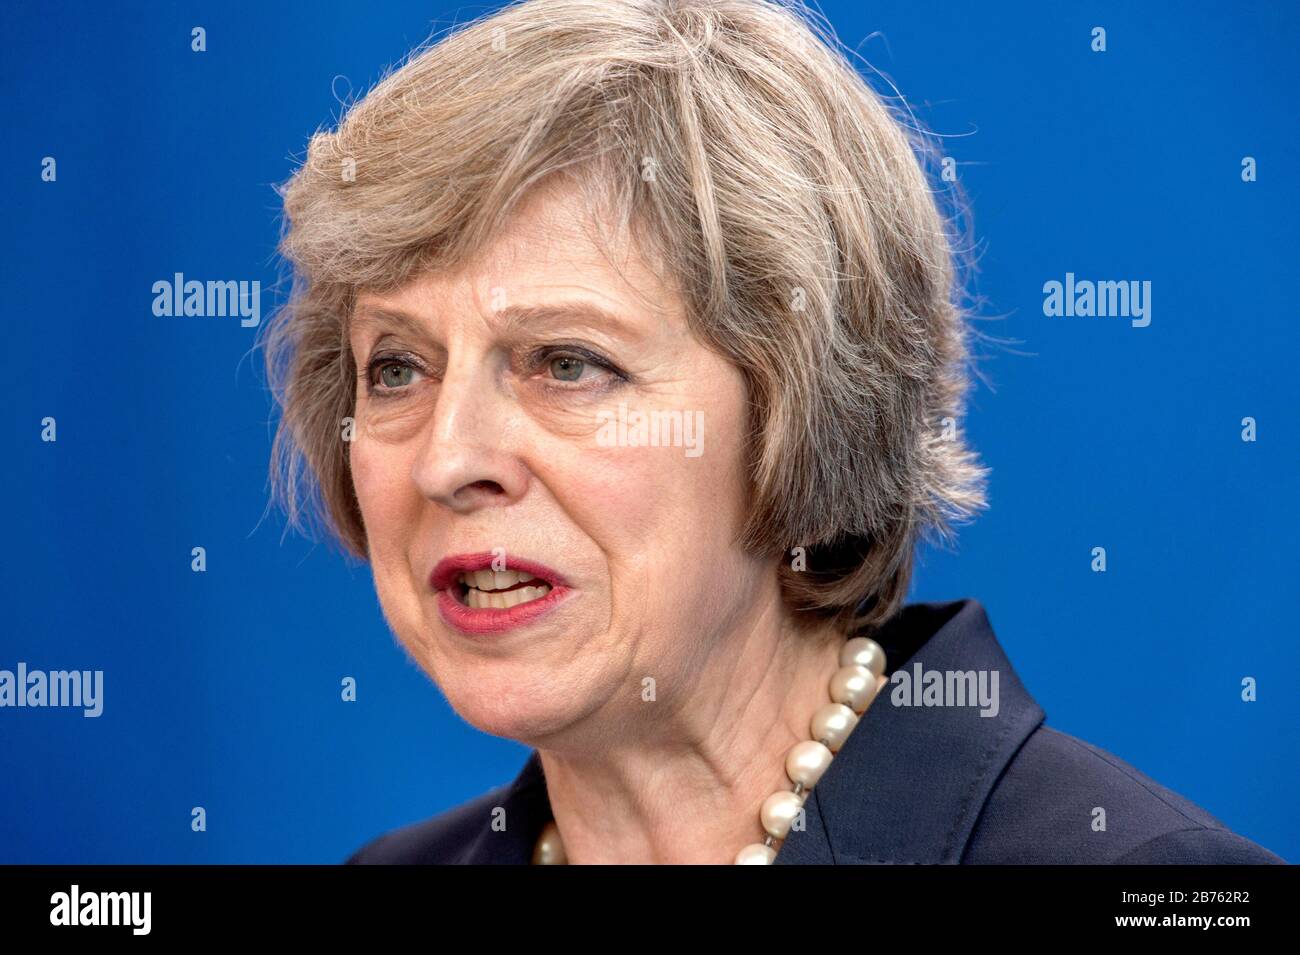 Germany, Berlin, 20.07.2016. Visit of the Prime Minister of the United Kingdom of Great Britain and Northern Ireland, Theresa May Brasier, to the Federal Chancellery on 20.07.2016.Theresa May Brasier, Prime Minister of the United Kingdom of Great Britain and Northern Ireland. [automated translation] Stock Photo